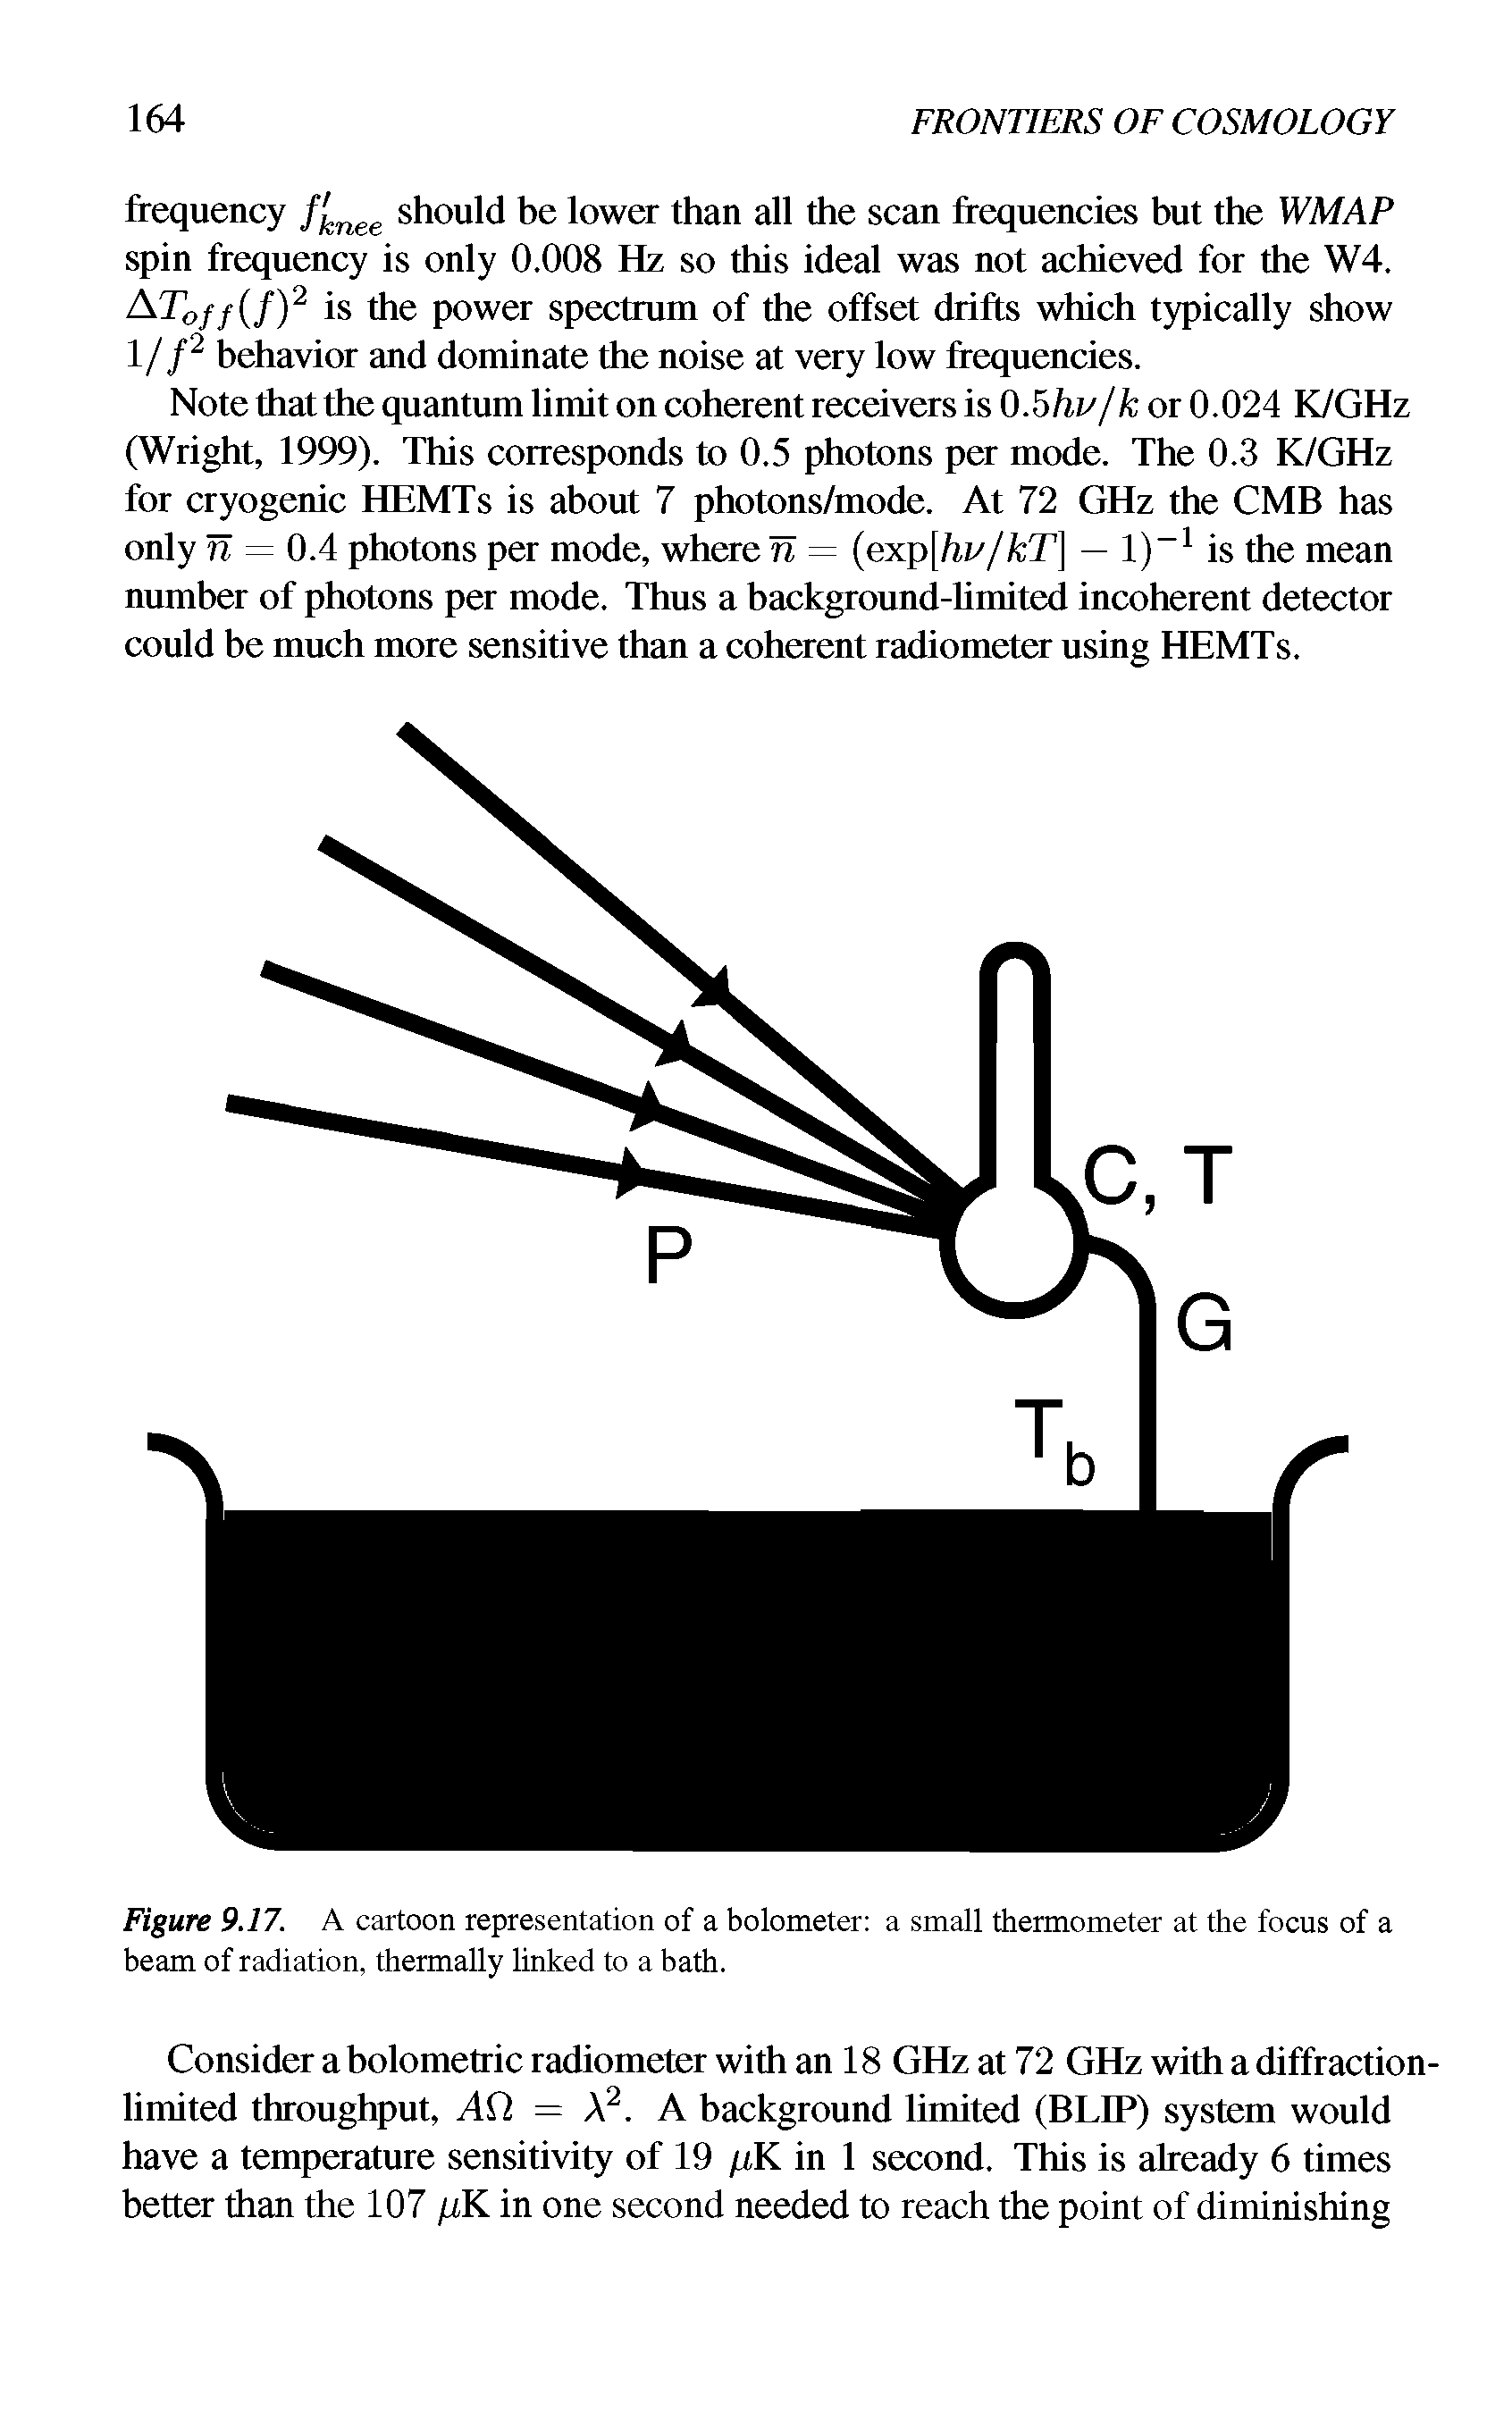 Figure 9.17. A cartoon representation of a bolometer a small thermometer at the focus of a beam of radiation, thermally linked to a bath.